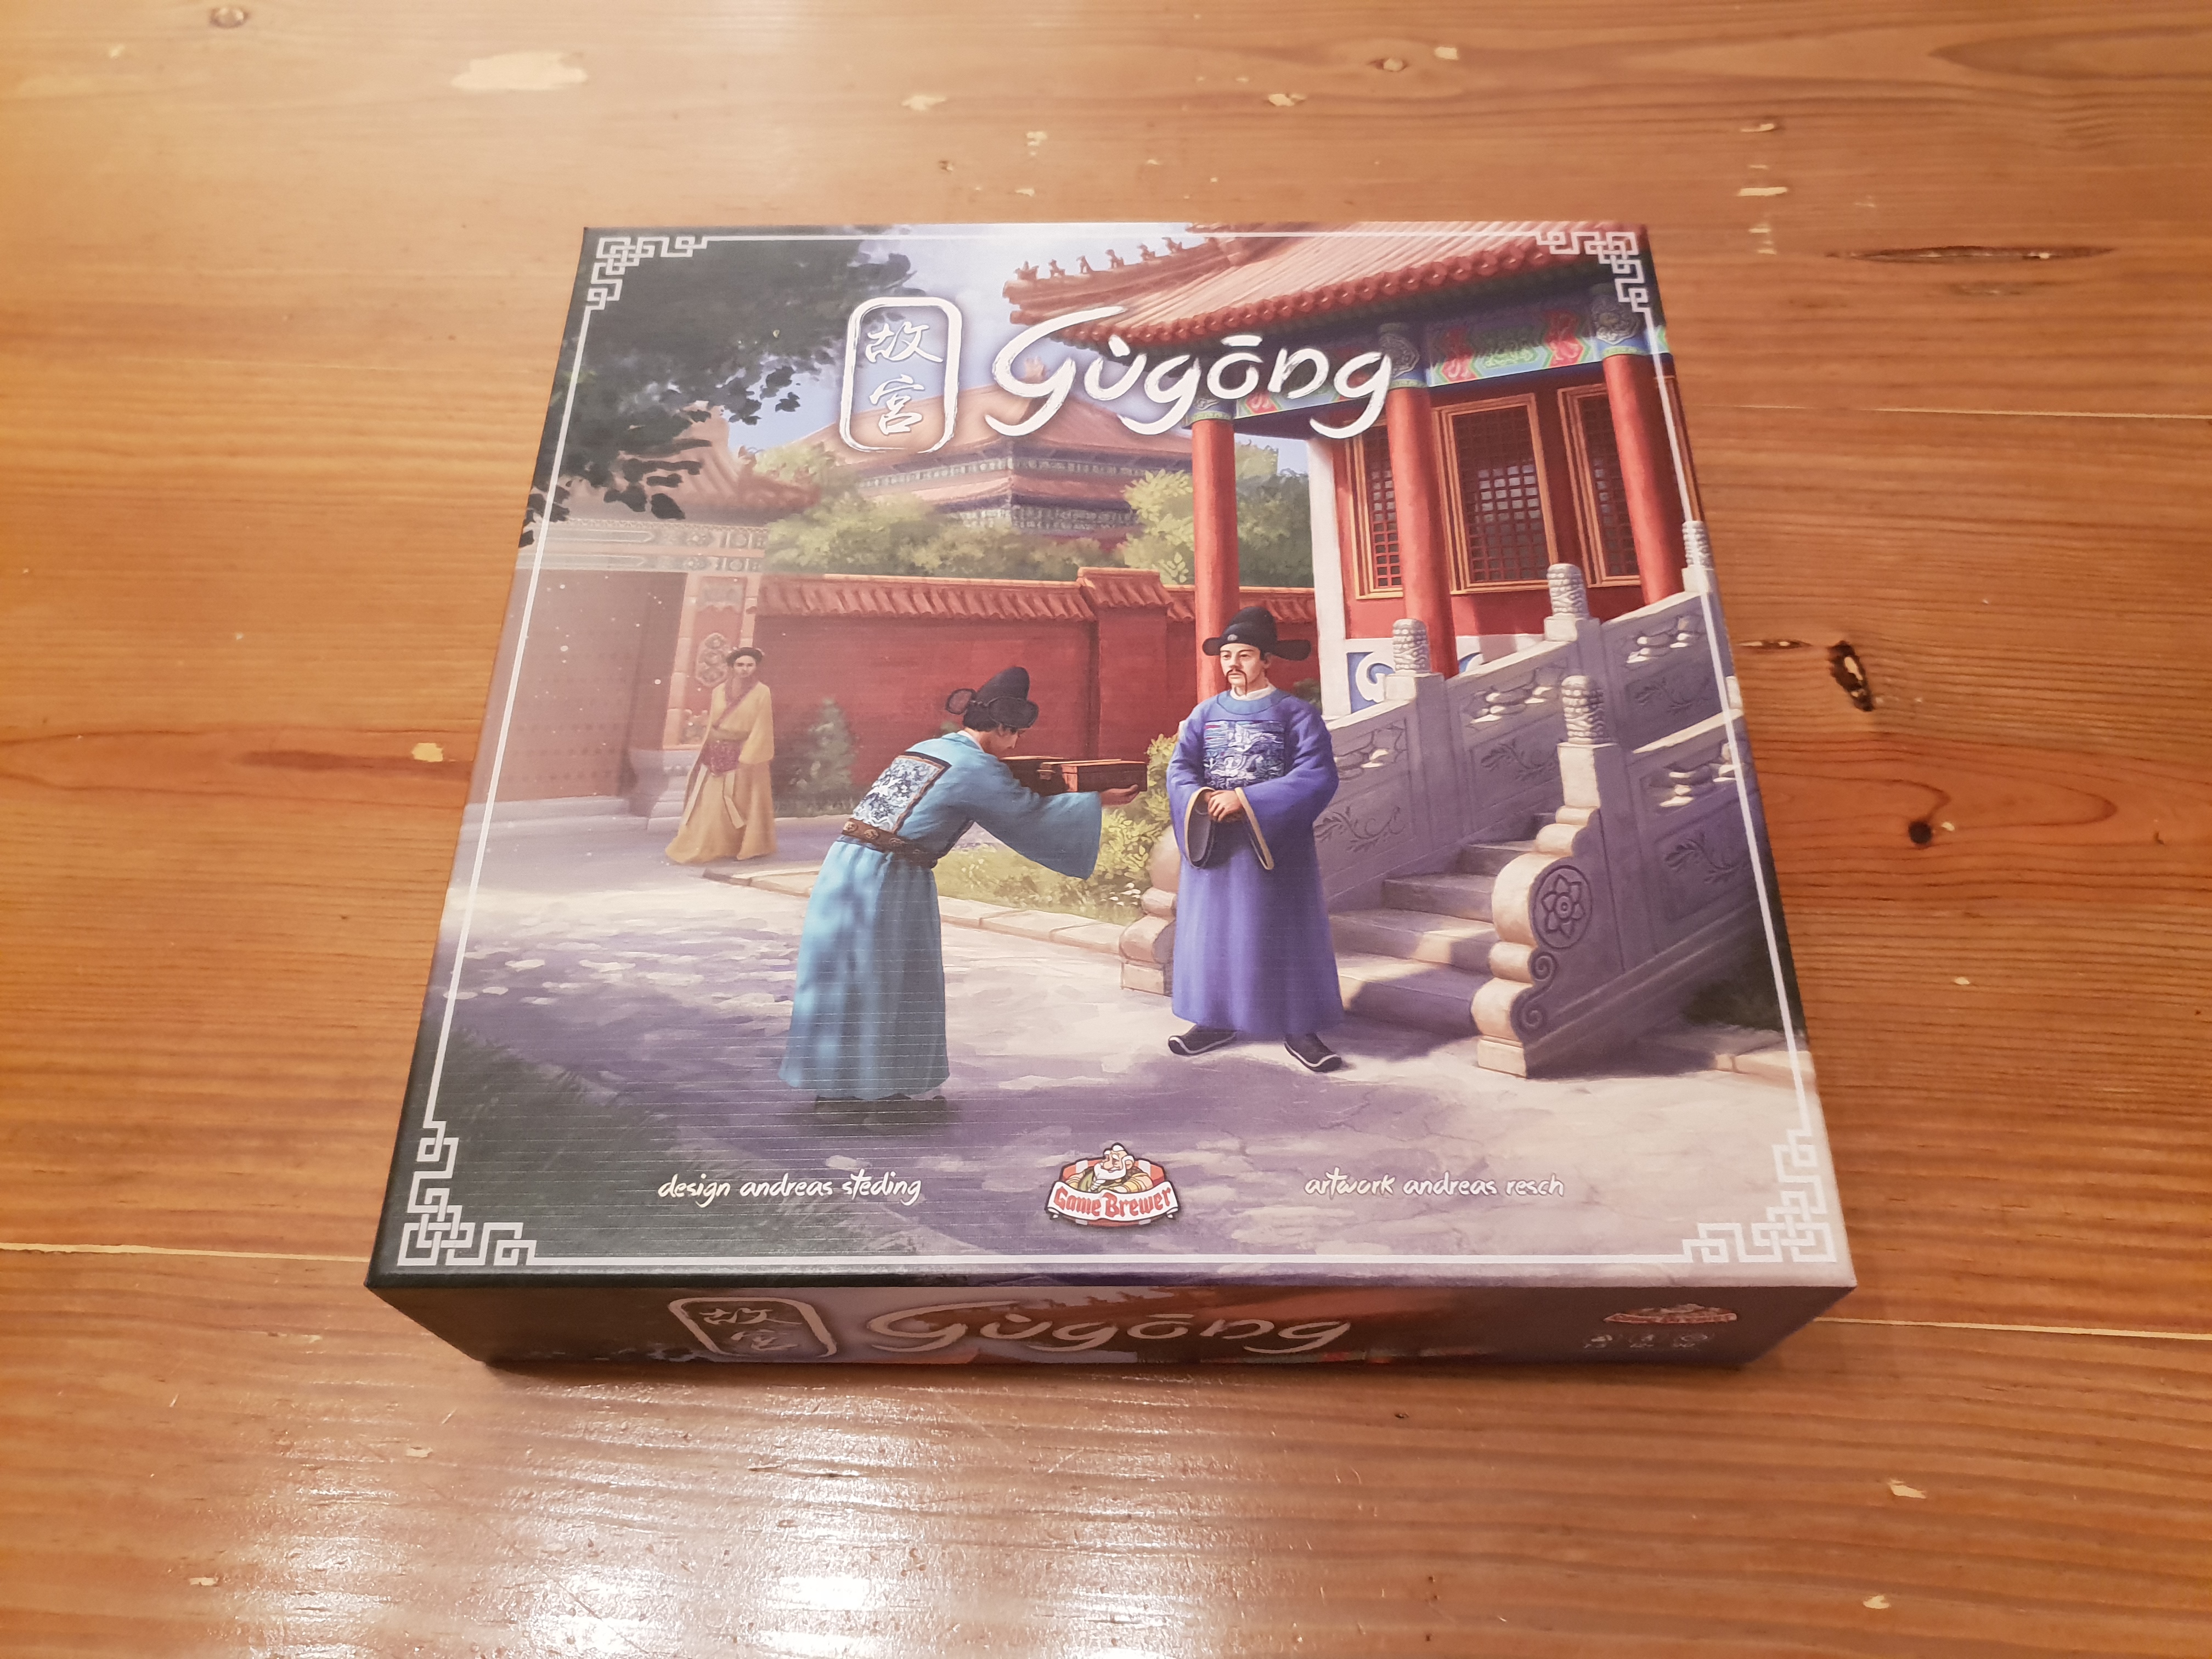 Gùgōng Review – One Brick Short Of The Great Wall